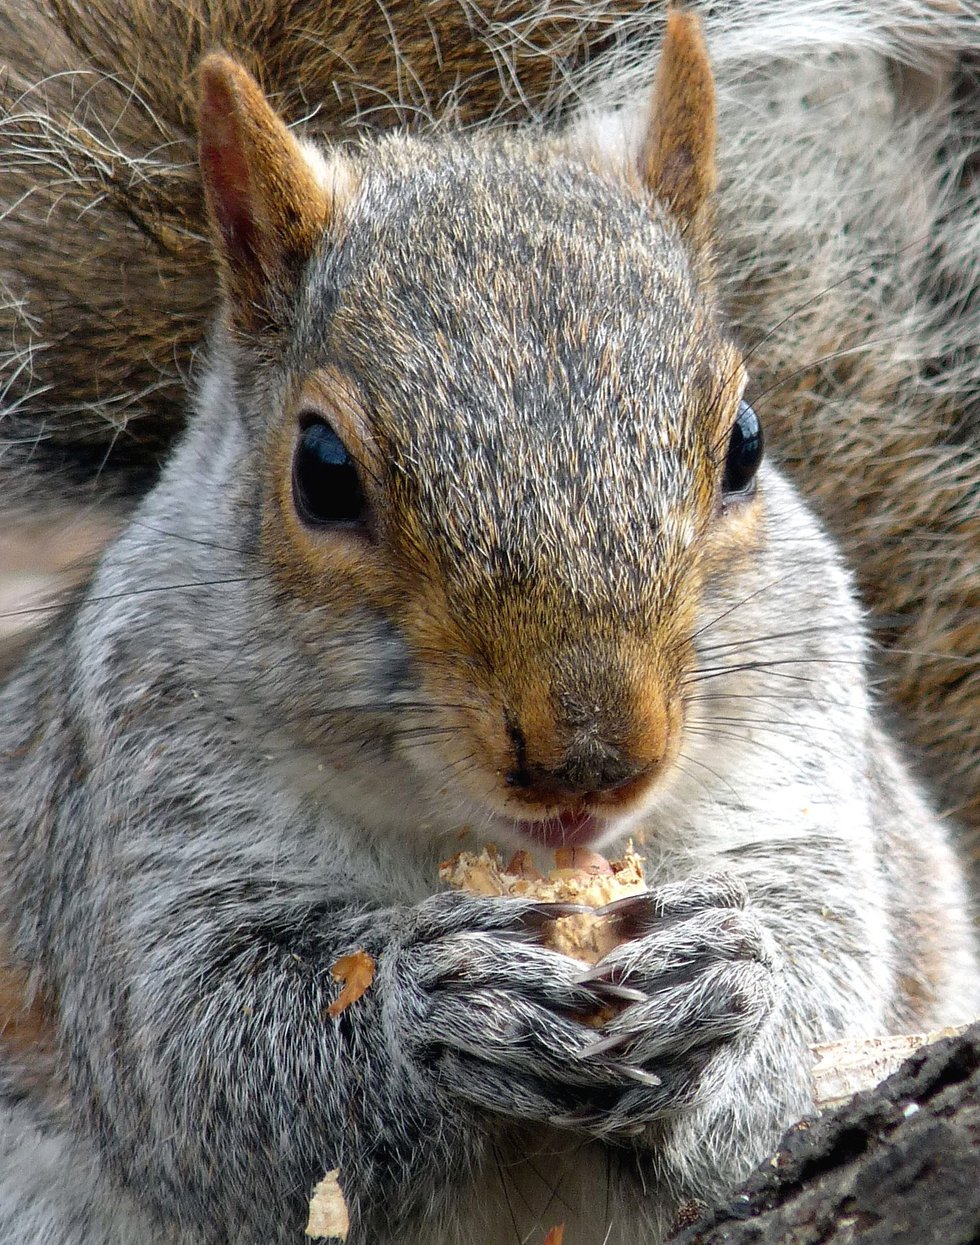 A Squirrel Happily Works for Peanuts in the Ramble